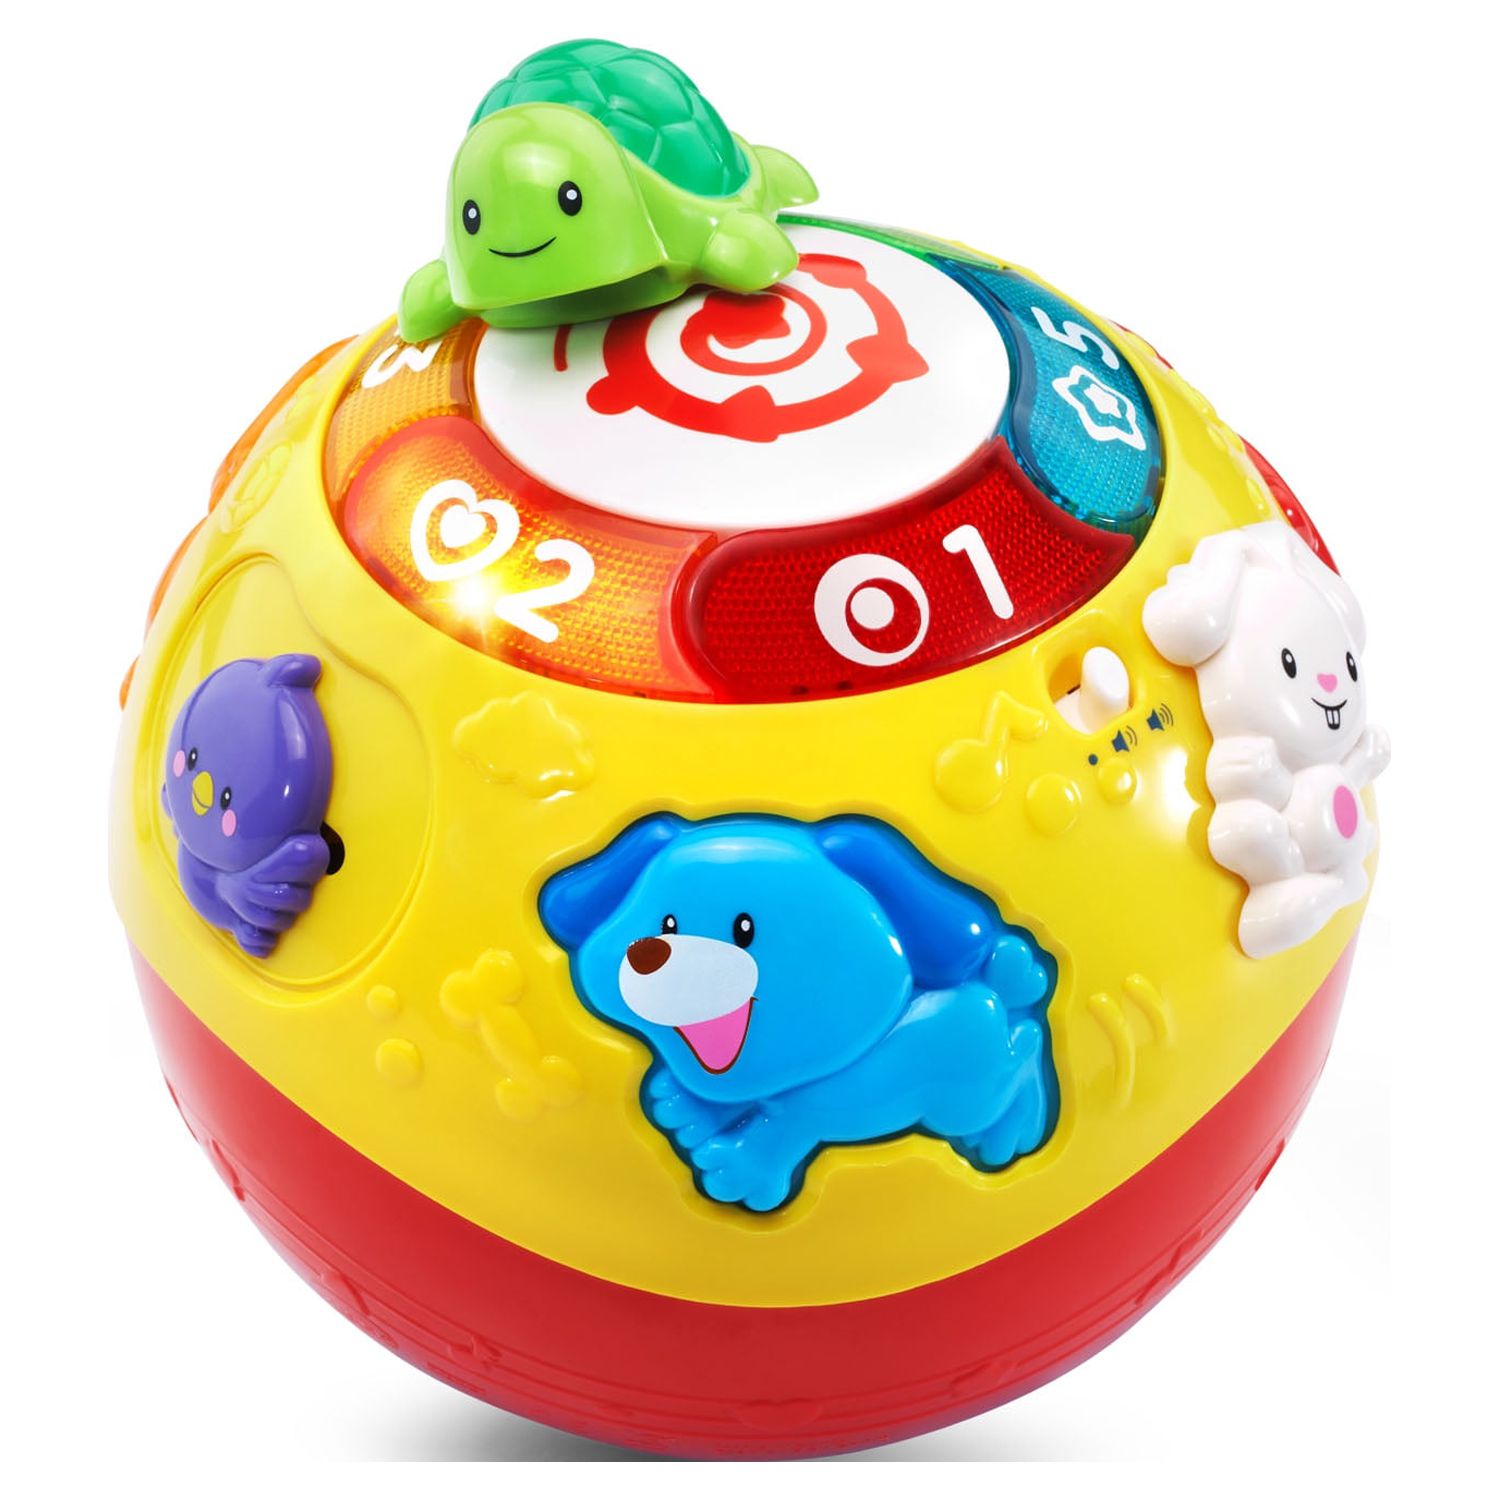 VTech Wiggle and Crawl Ball for Babies and Toddlers, Encourages Motor Skills, Teaches Shapes & Colors - image 1 of 10